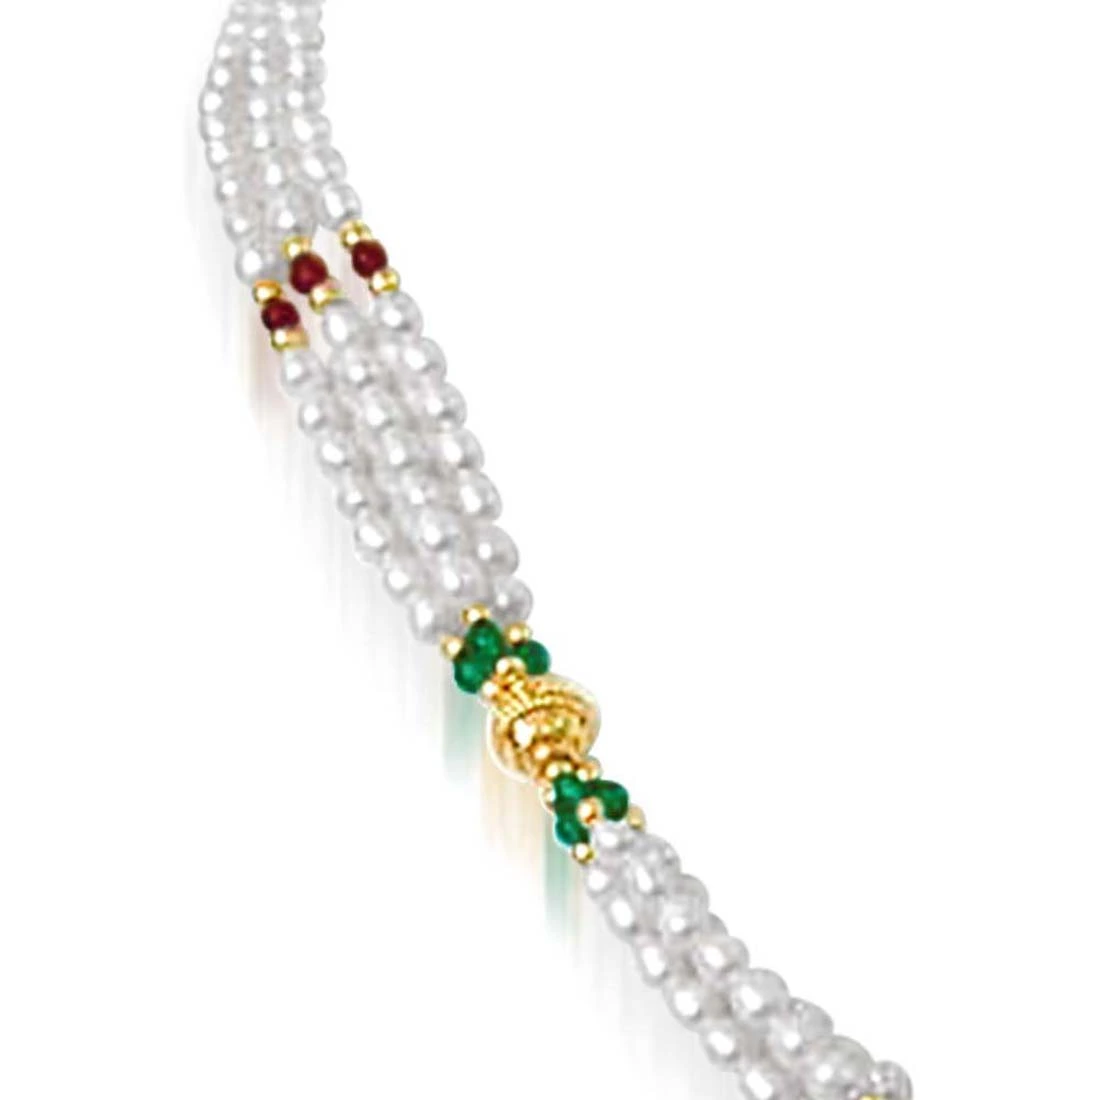 Elegance - Gold Plated Temple Design Pendant & 3 Line Rice Pearl, Green Onyx & Garnet Beads Pendant Necklace for Women (SNP19)